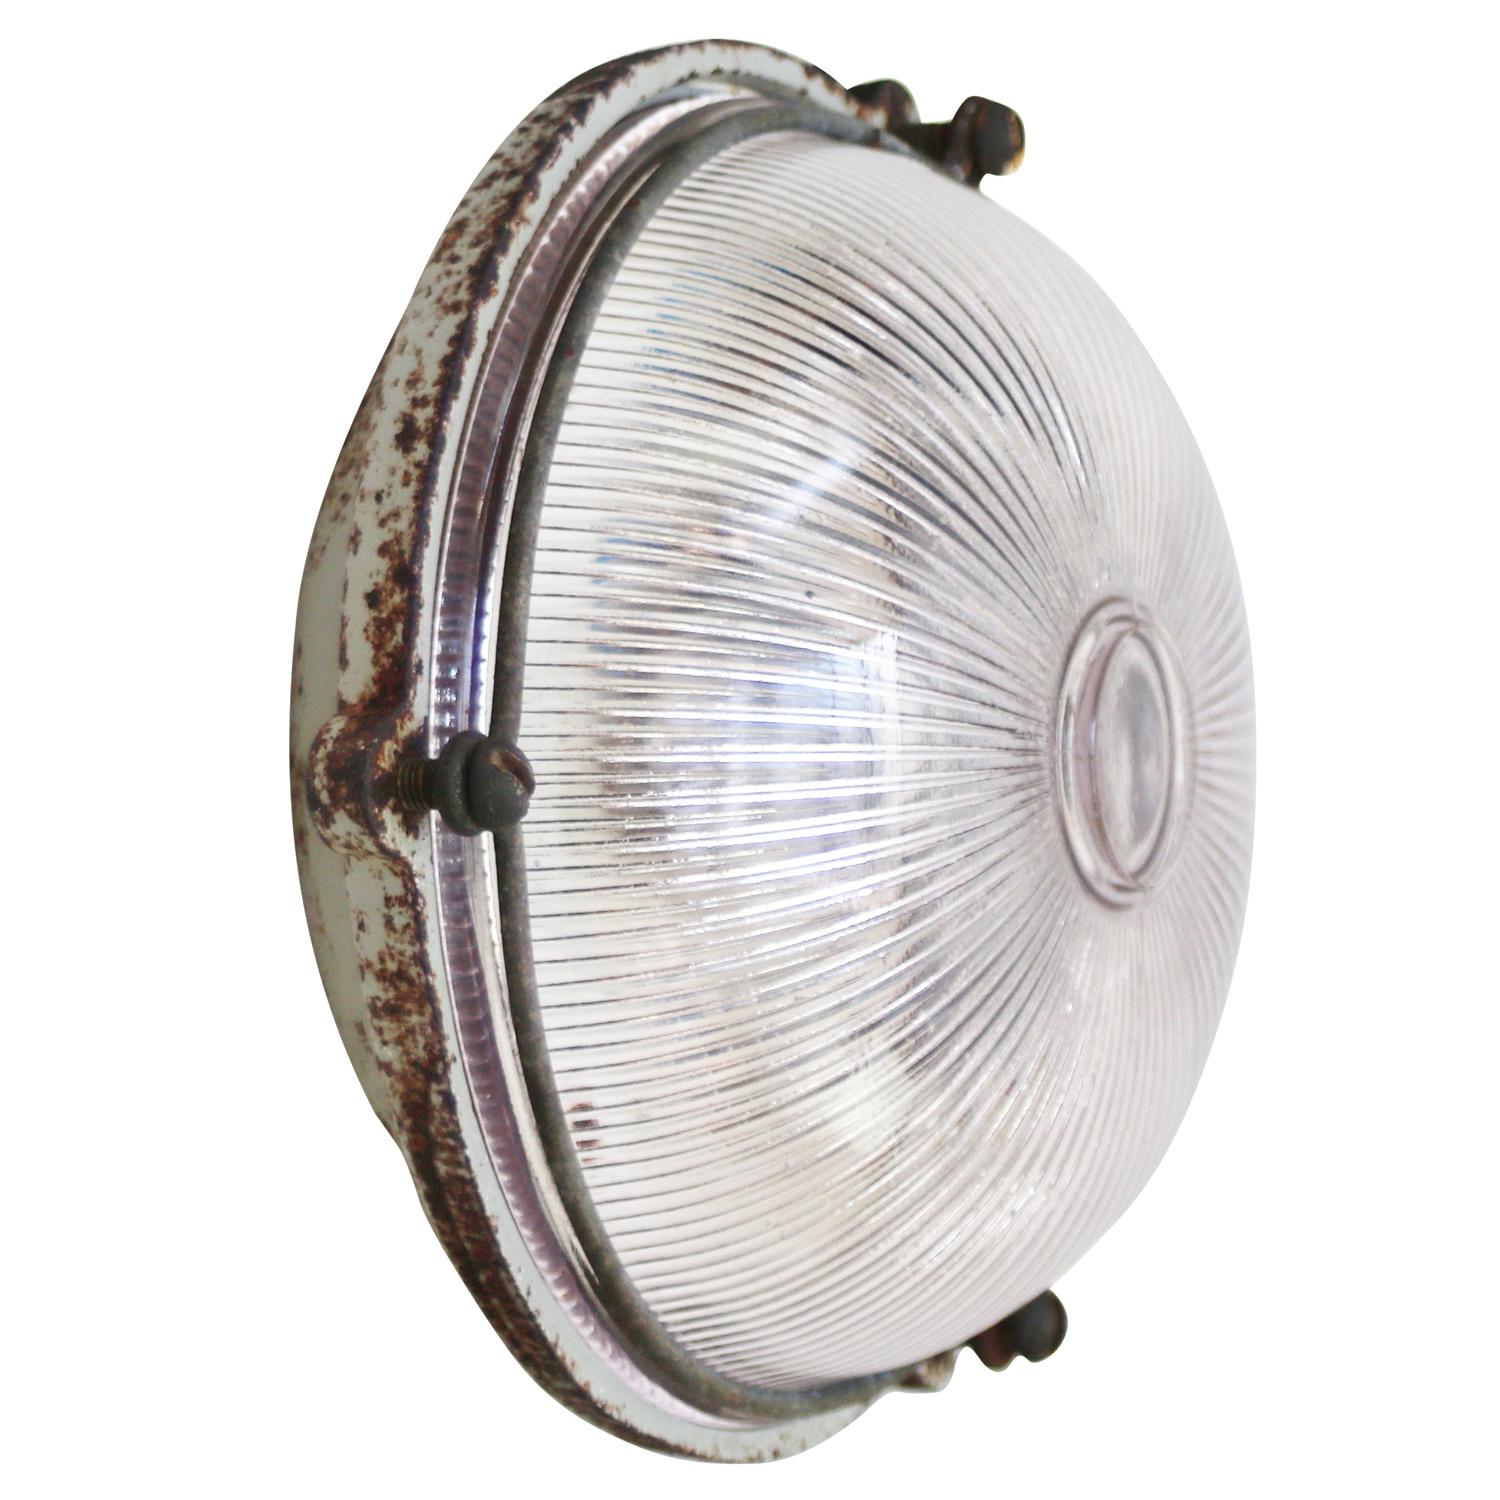 French Industrial wall / ceiling lamp by Mapelec, Amiens, France
Cast Iron back with clear striped glass.

Weight 2.60 kg / 5.7 lb

Priced per individual item. All lamps have been made suitable by international standards for incandescent light